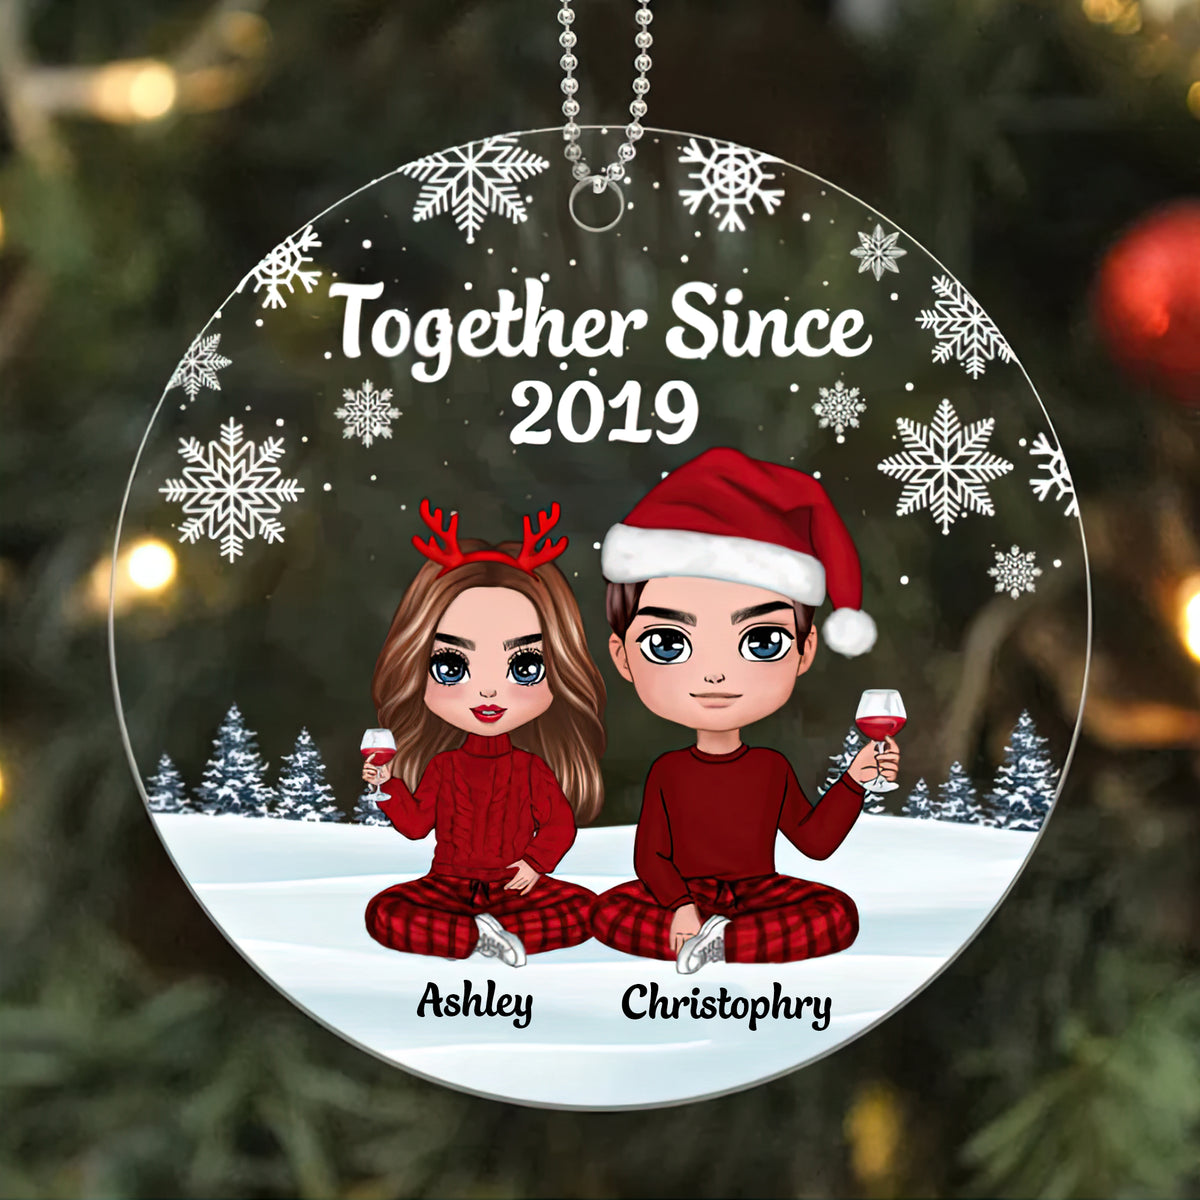 Since We've Been Together Ornament - Gift For Couple